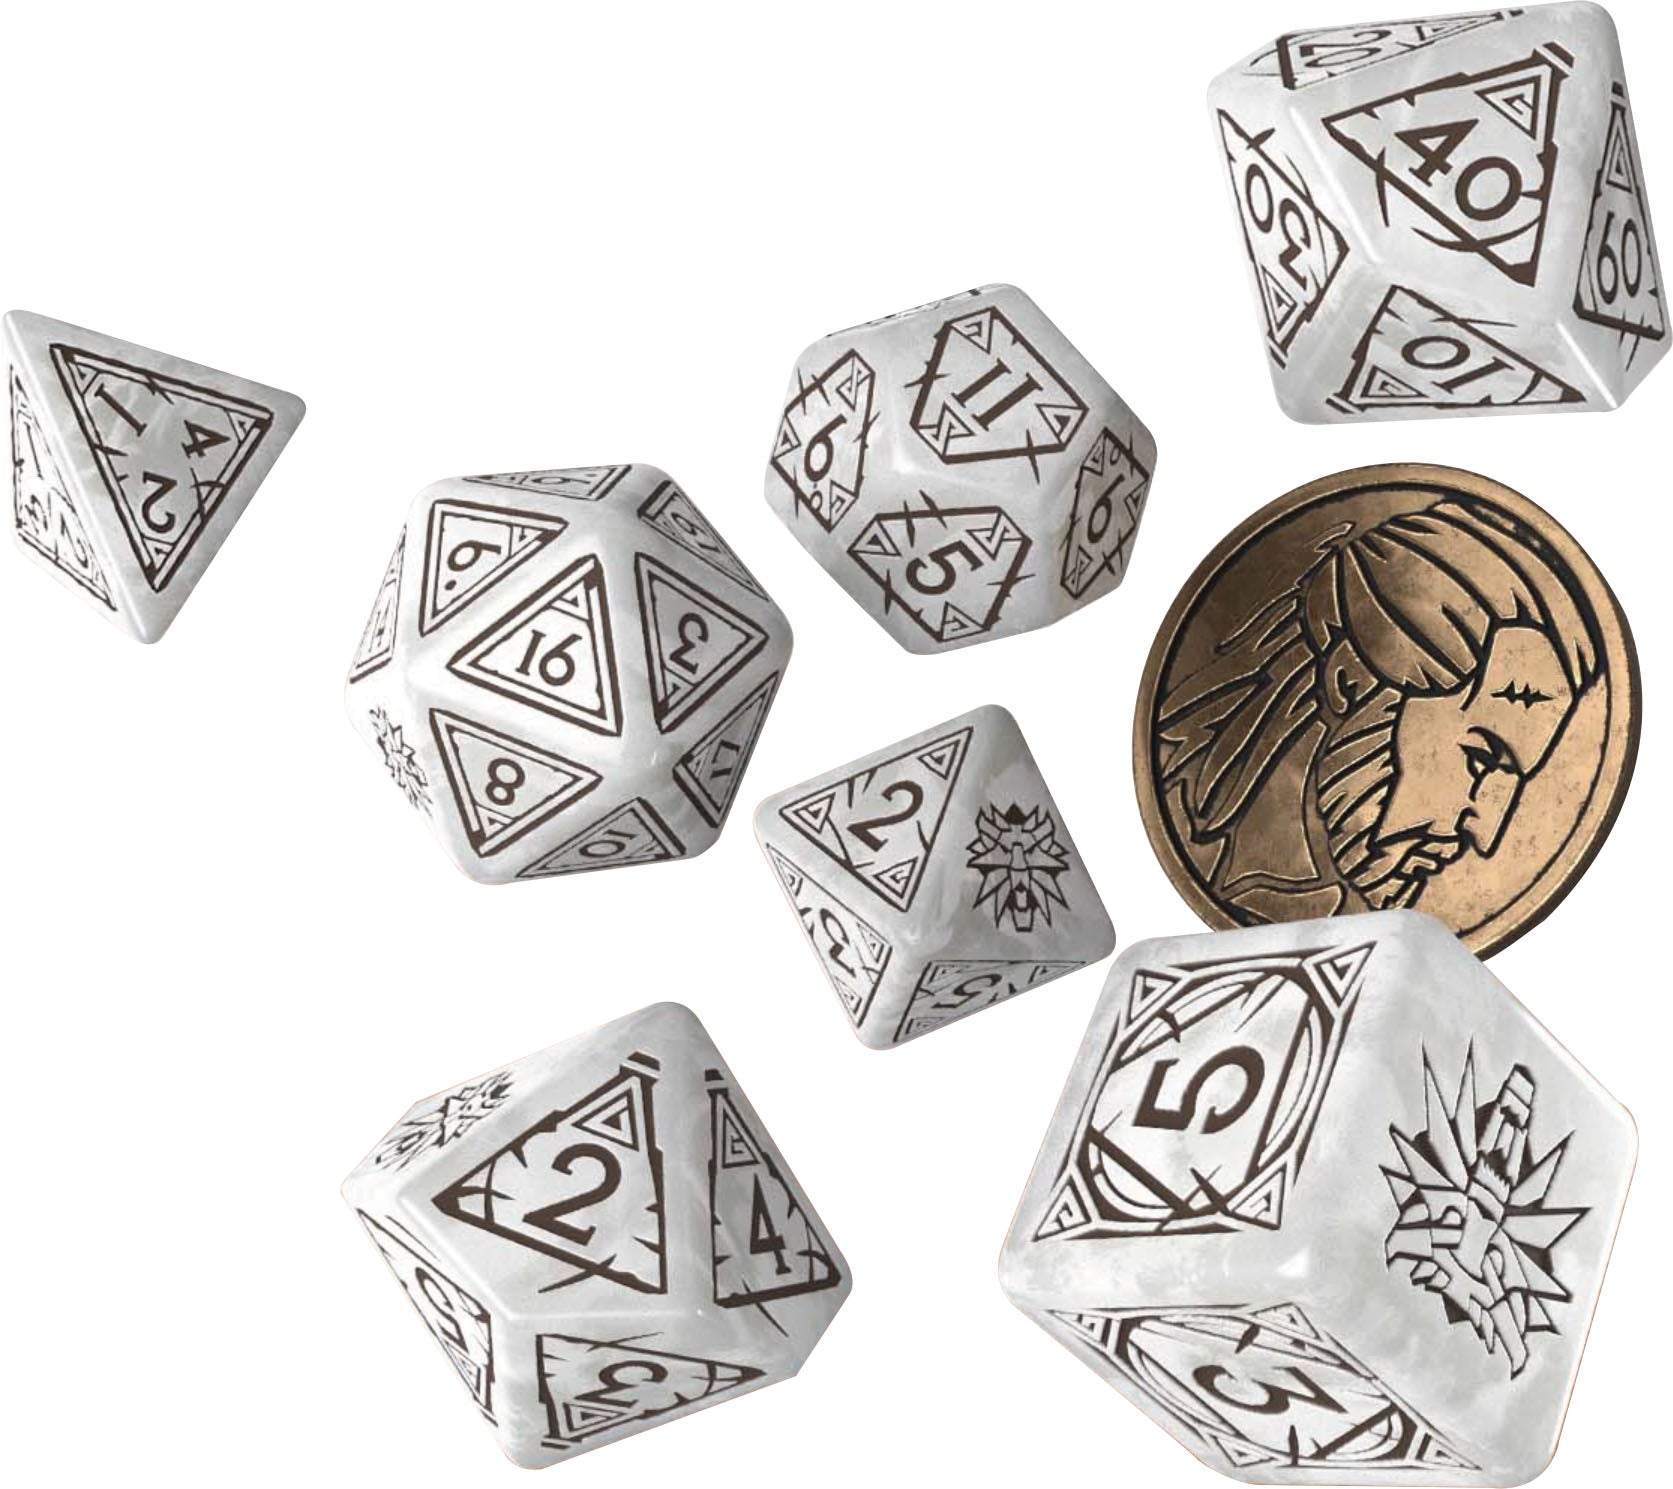 The Witcher Dice Set: Geralt - The White Wolf (7 + coin) - Bards & Cards